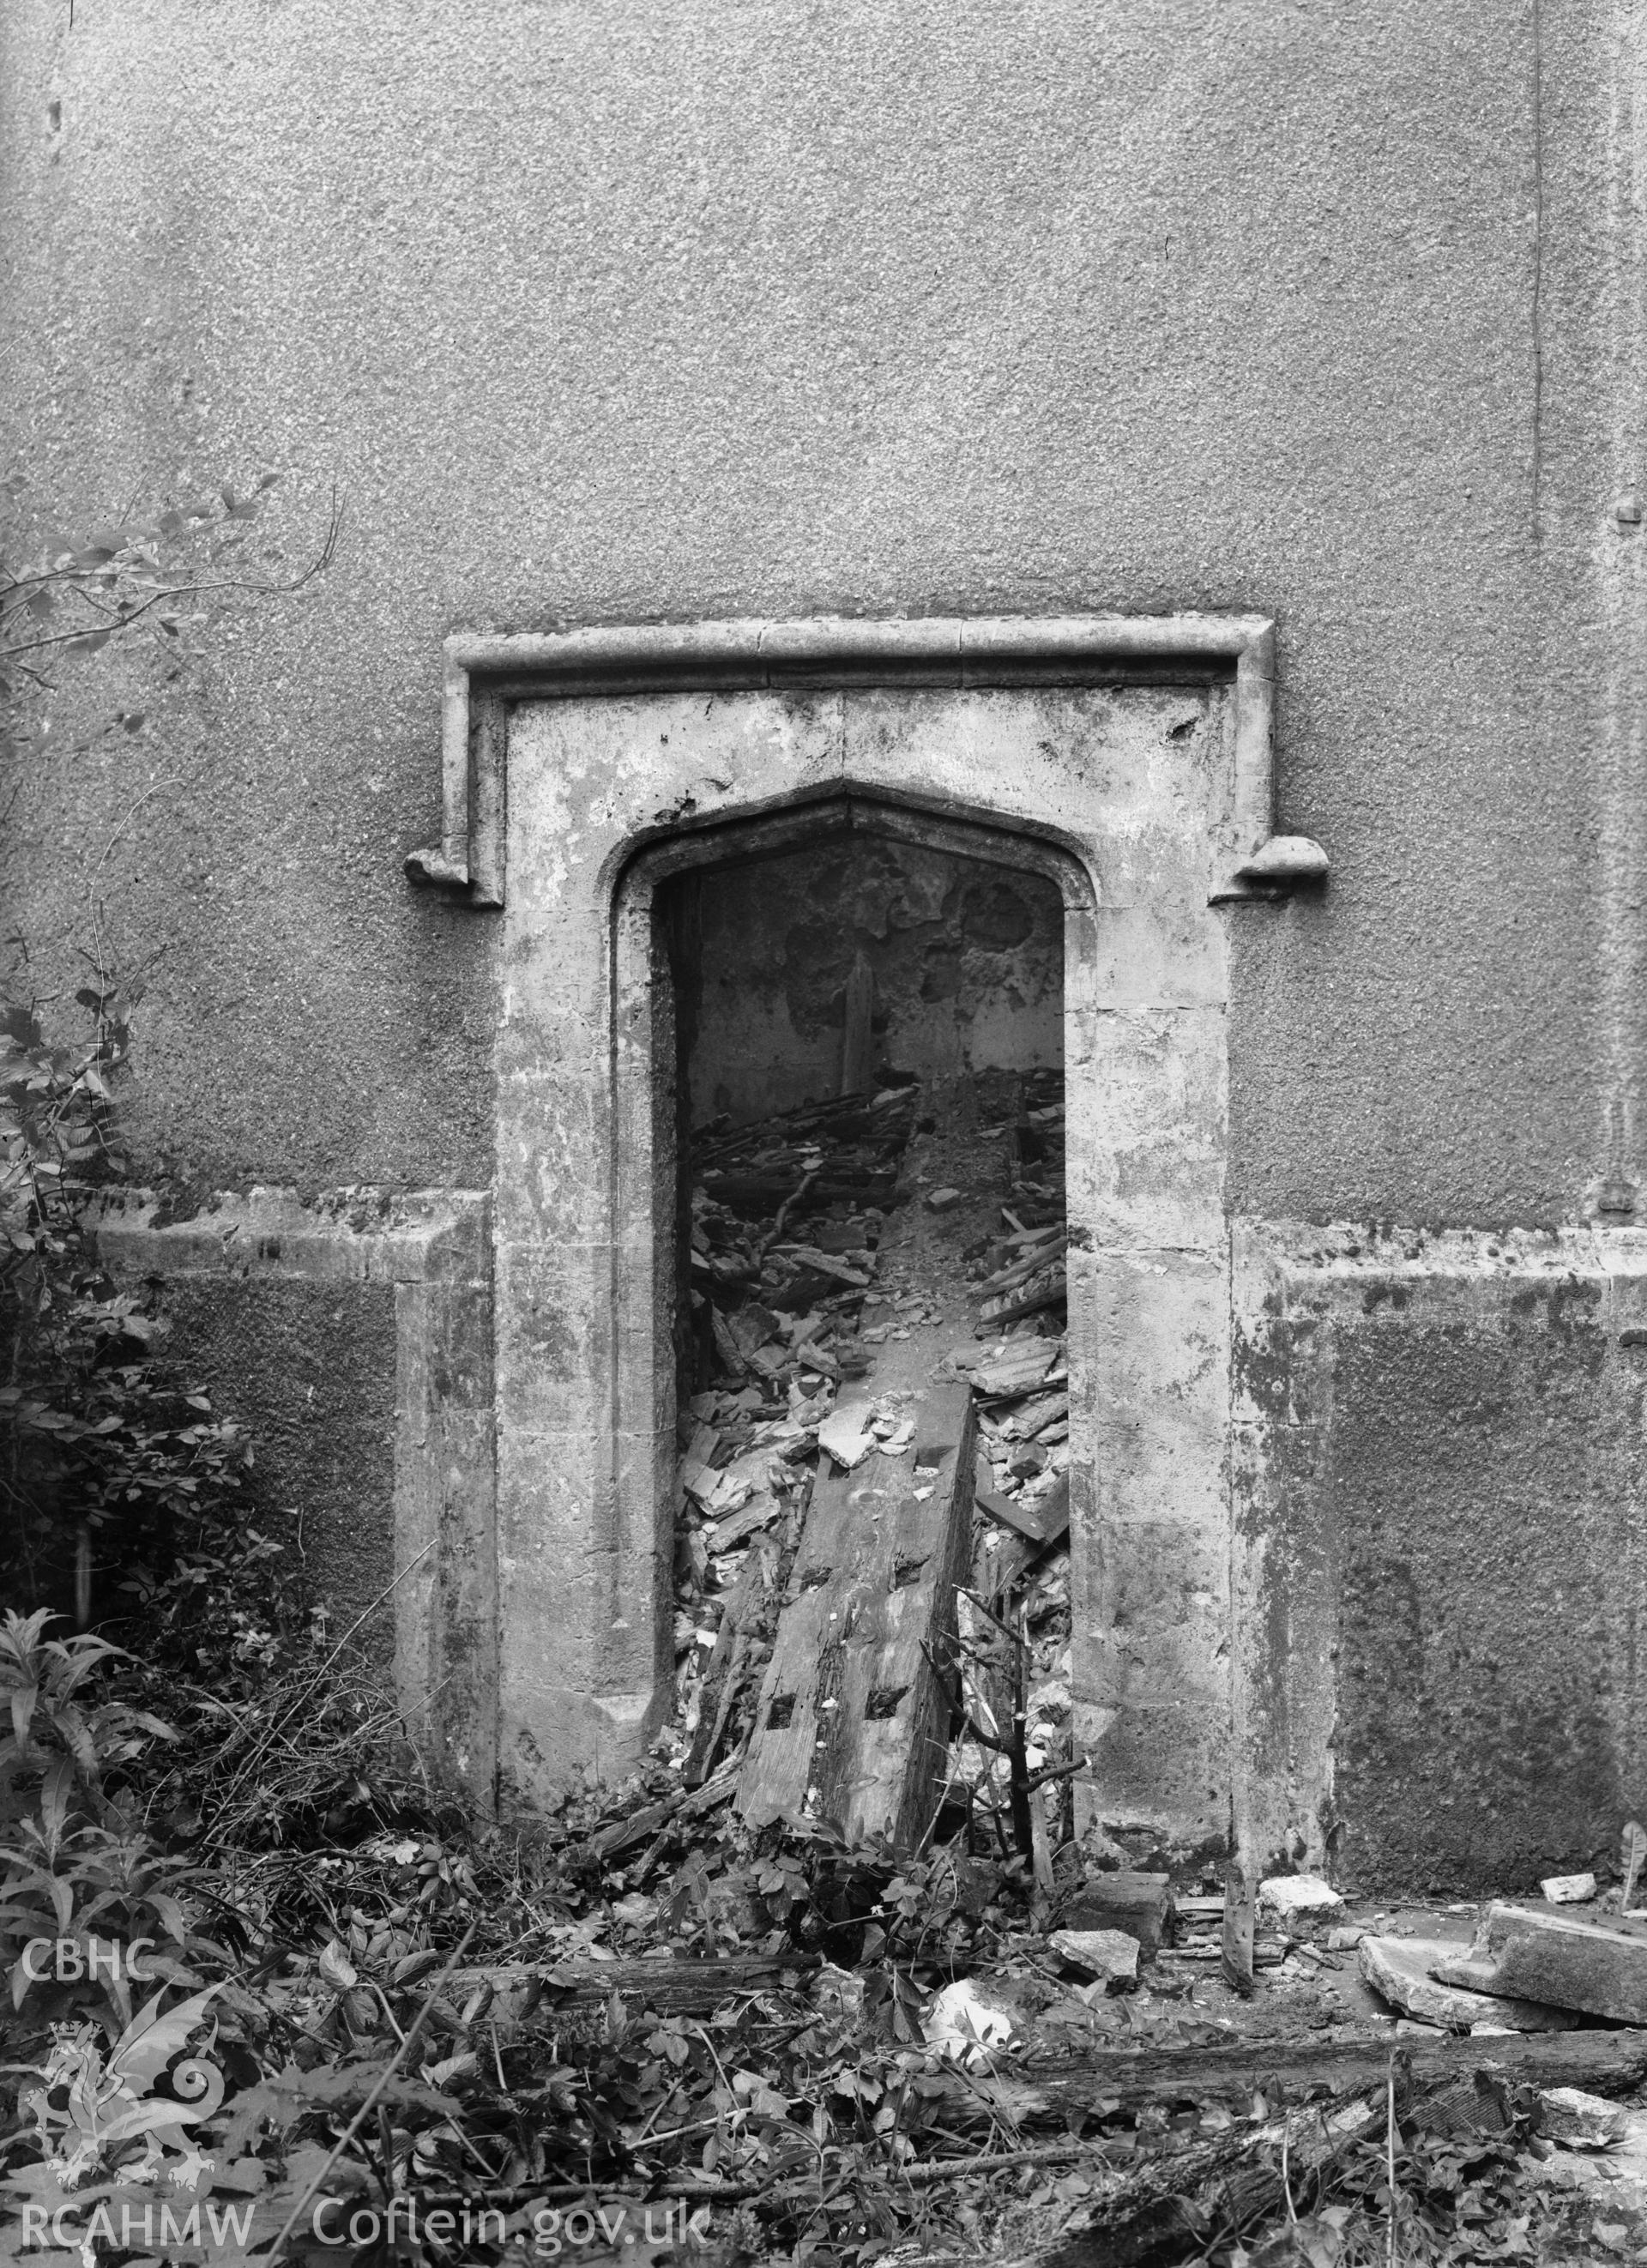 View of the north east Tower entrance of Ruperra Castle, taken in 1962.